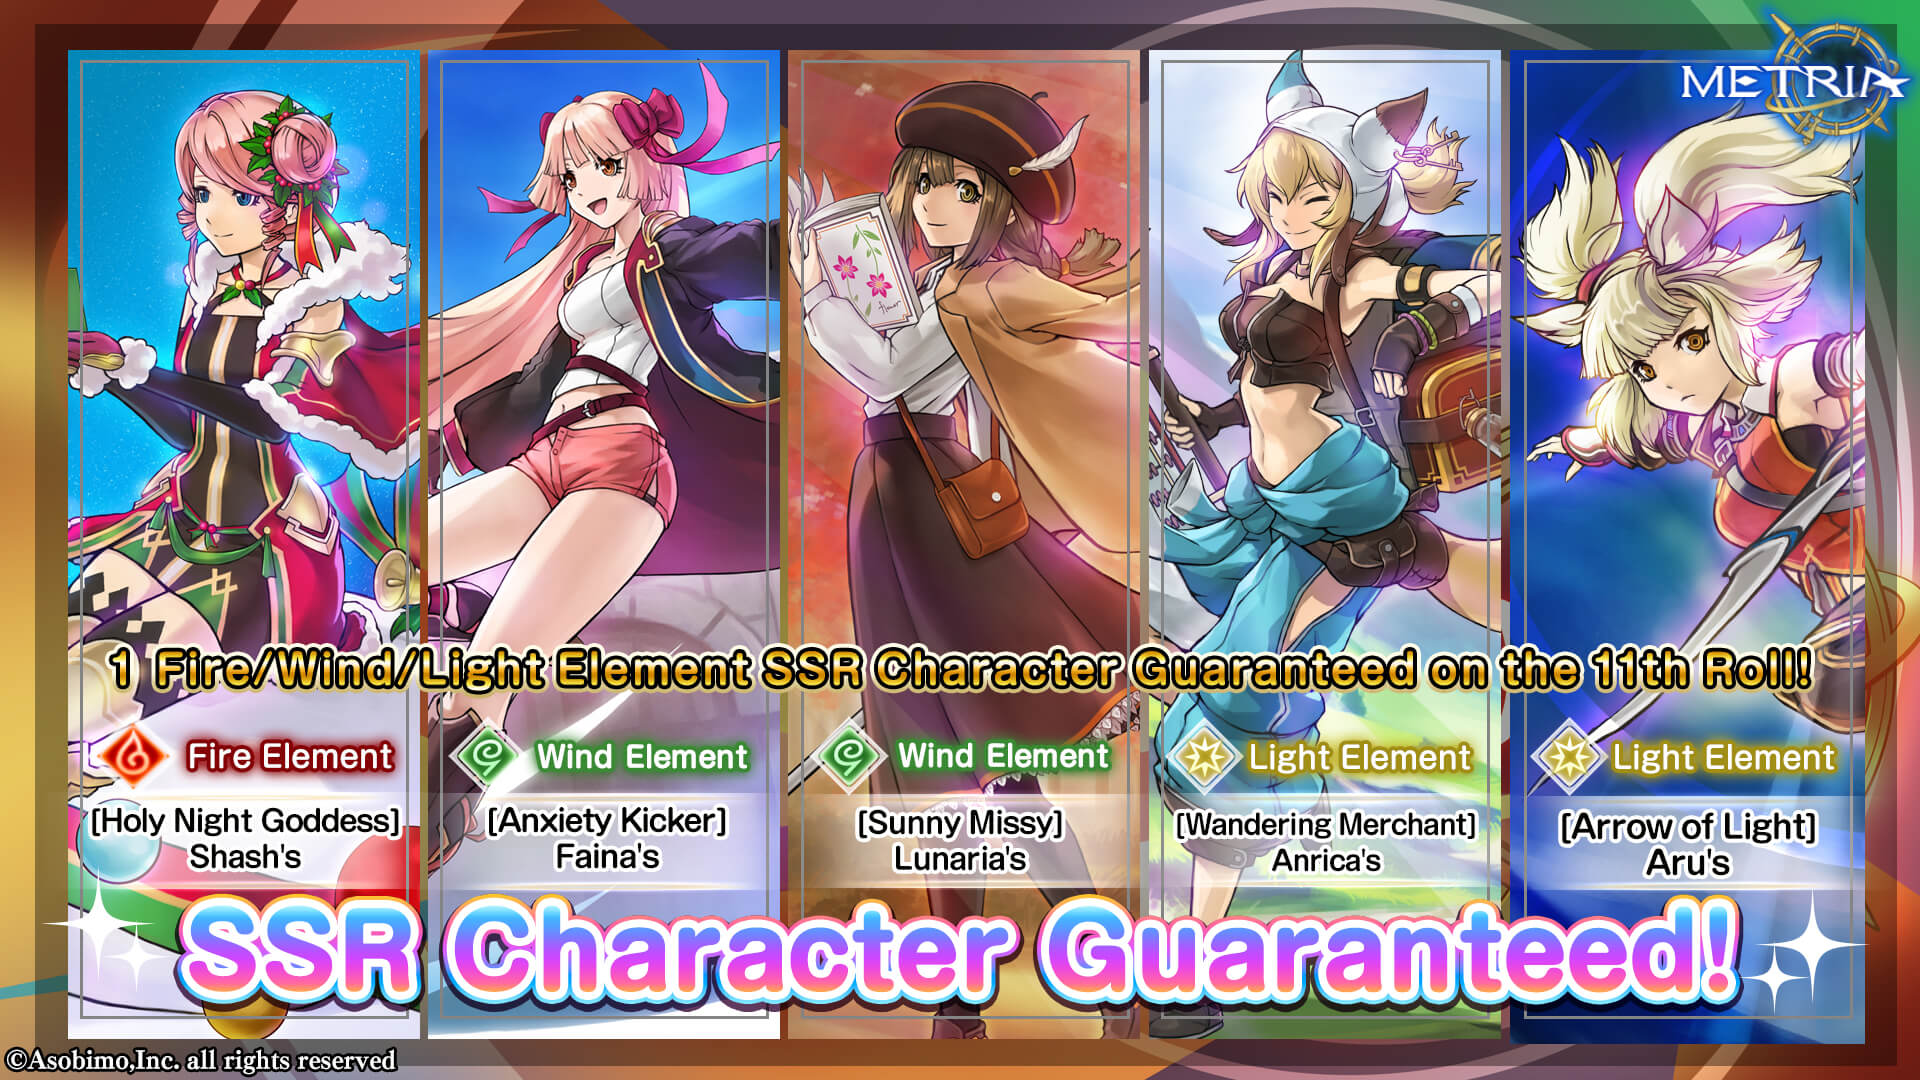 Golden week Guaranteed SSR Character Gacha that gives you 1 Fire/Wind/Light Element SSR such as [Holy Night Goddess] Shash's for sure is available! ...More